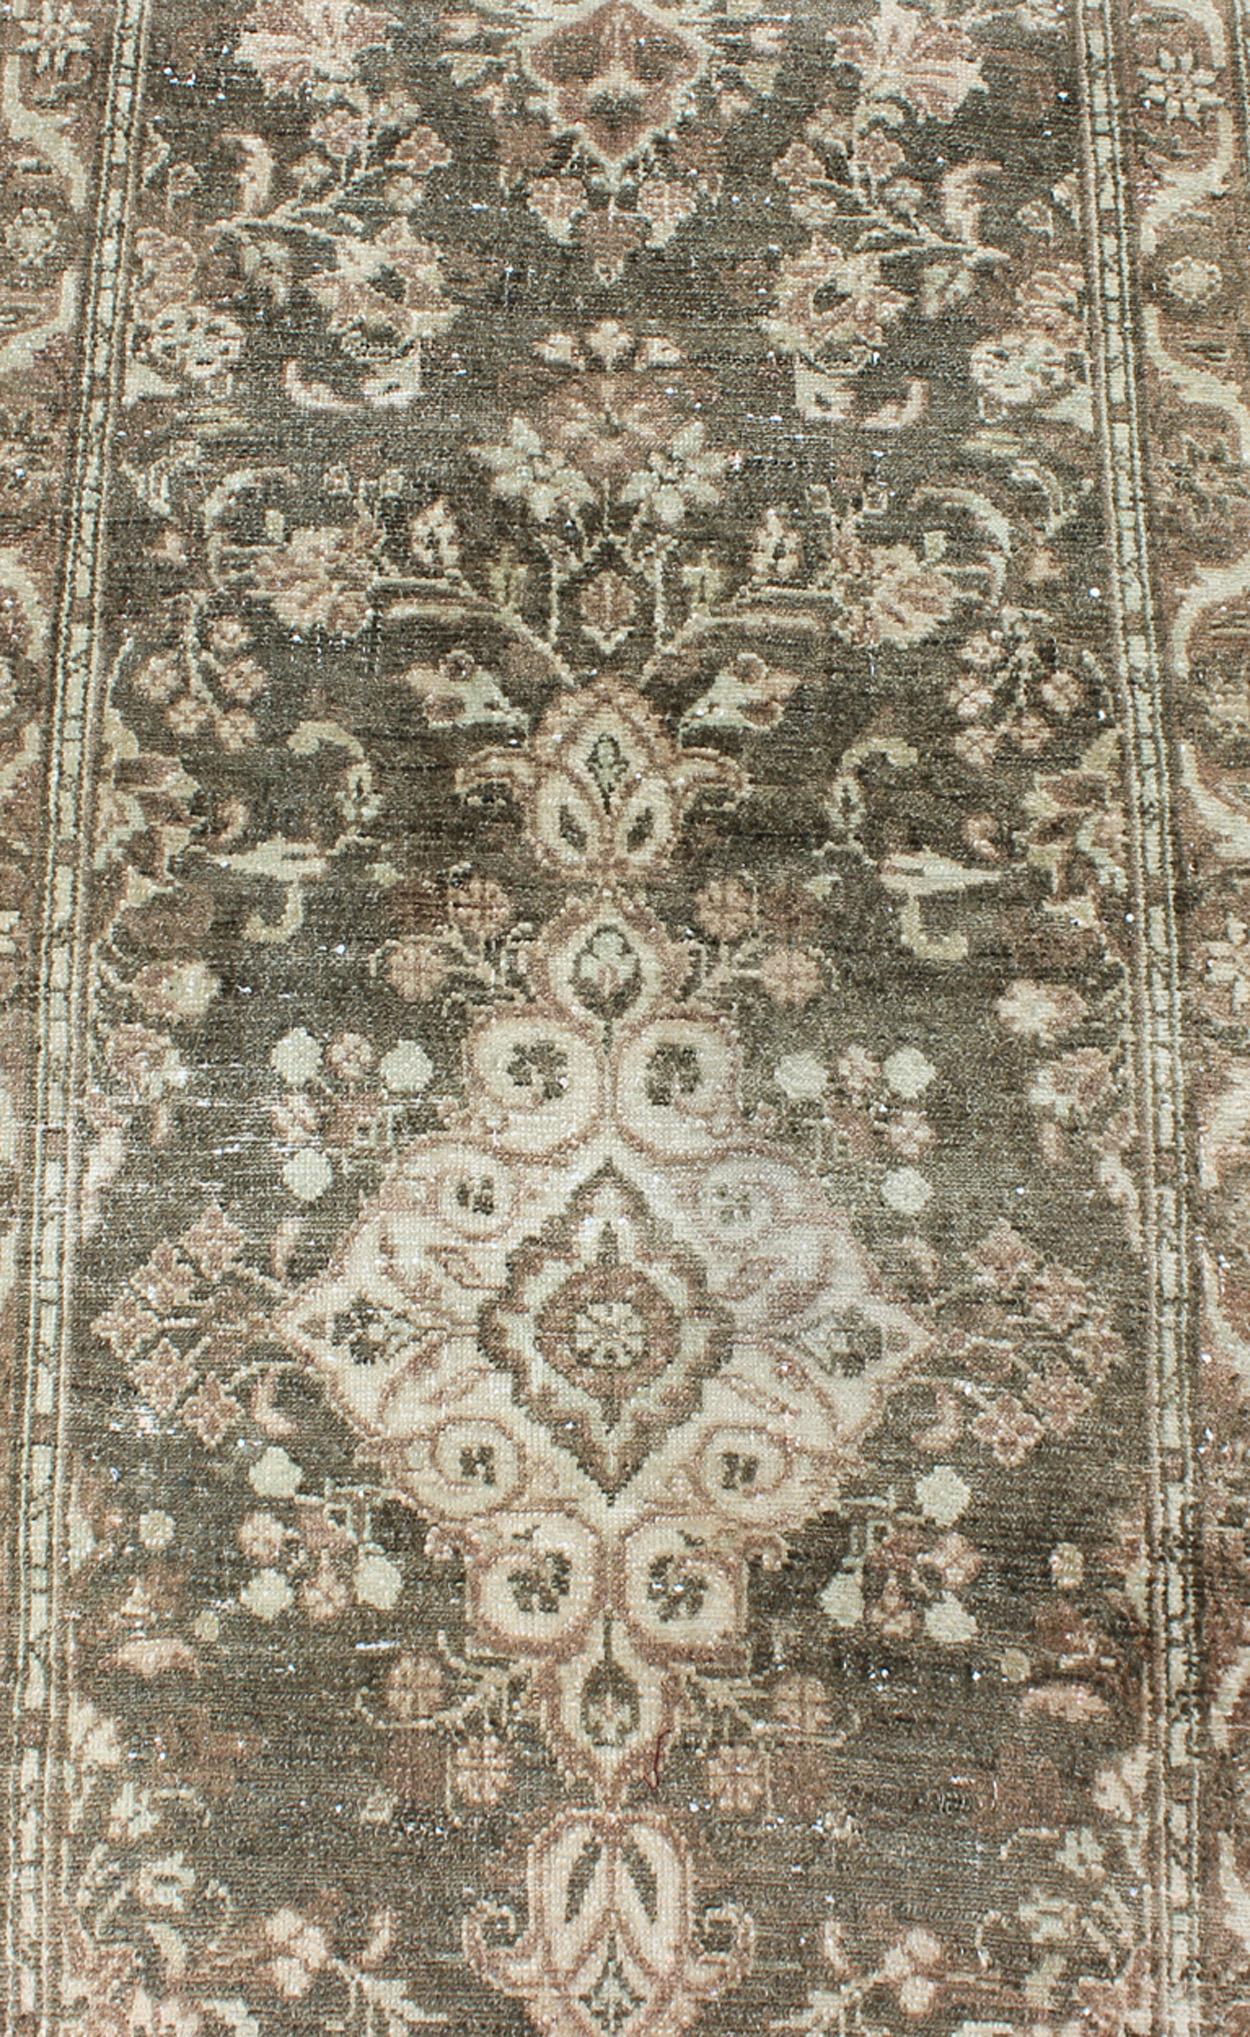 Malayer Very Long Antique Persian Runner with Floral Medallions in Warm Sage Green For Sale